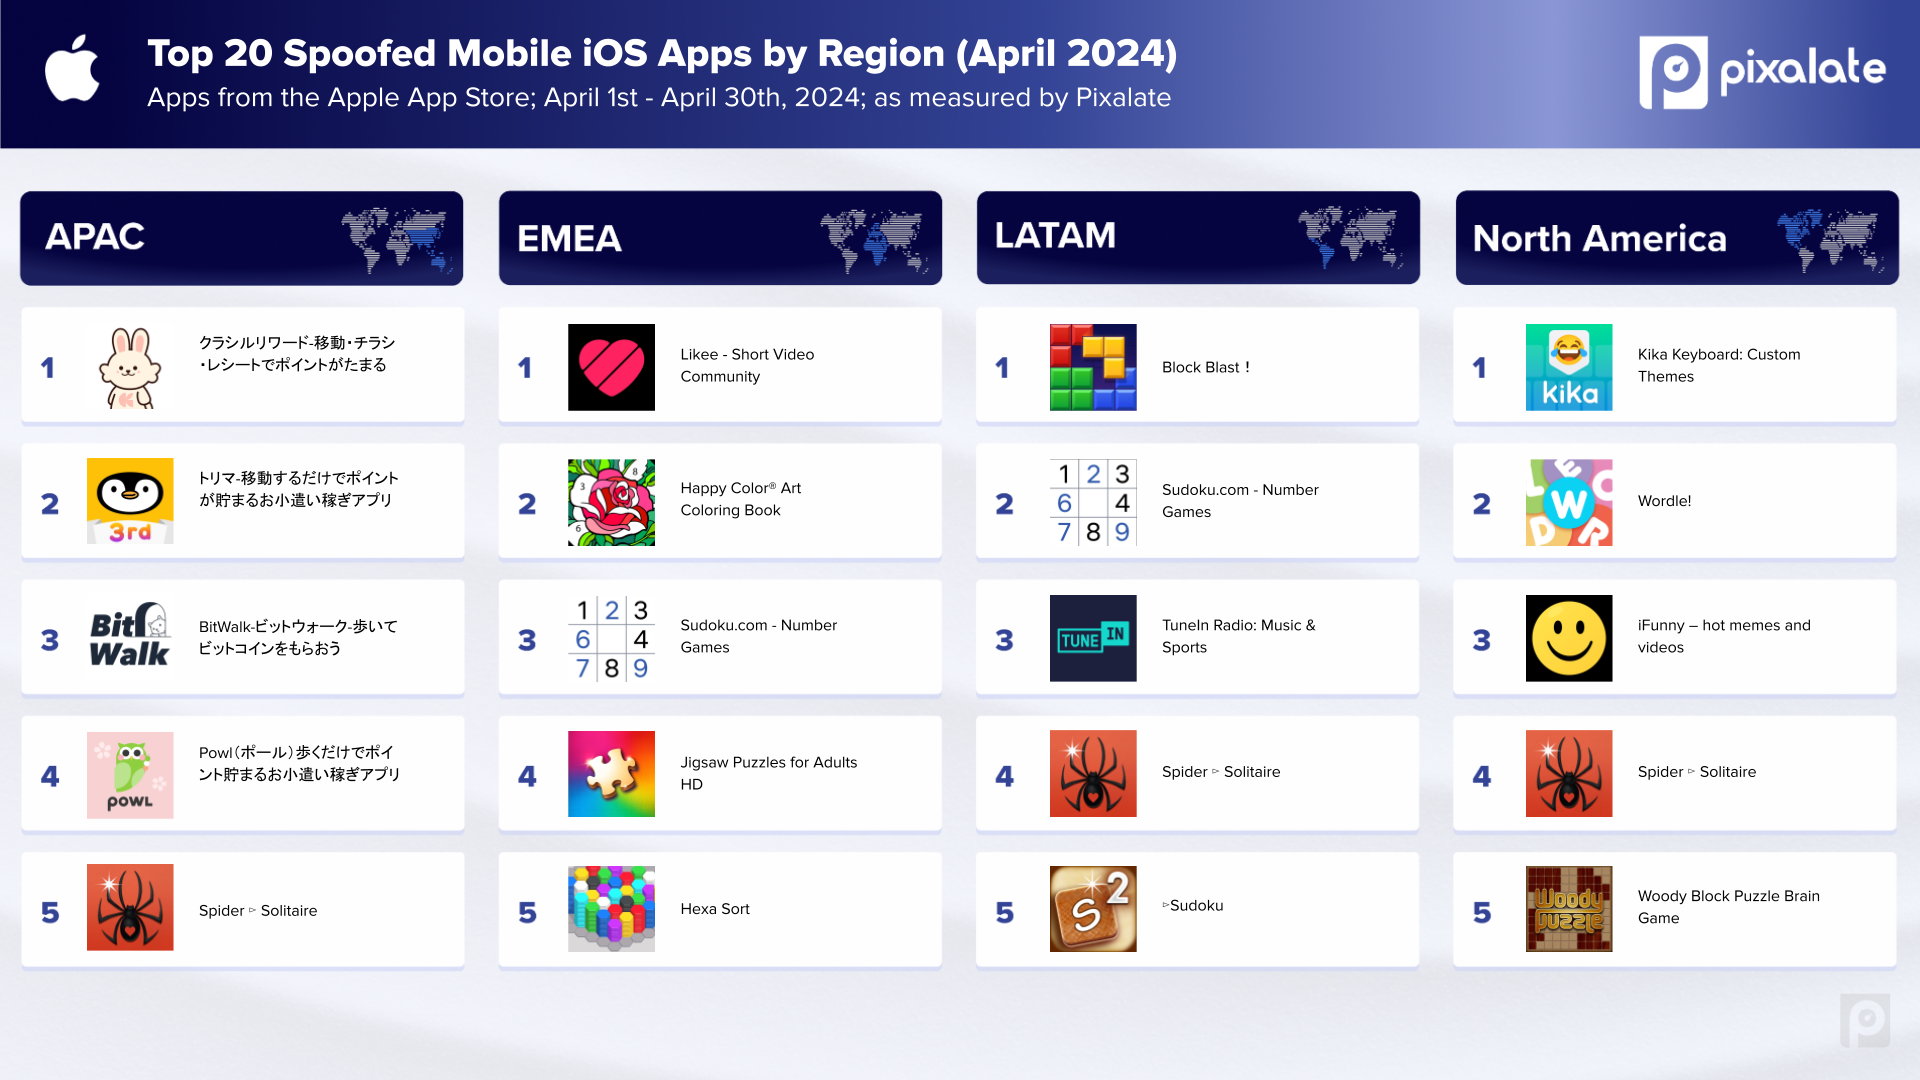 iOS_Top 20 Spoofed Mobile Apps by region